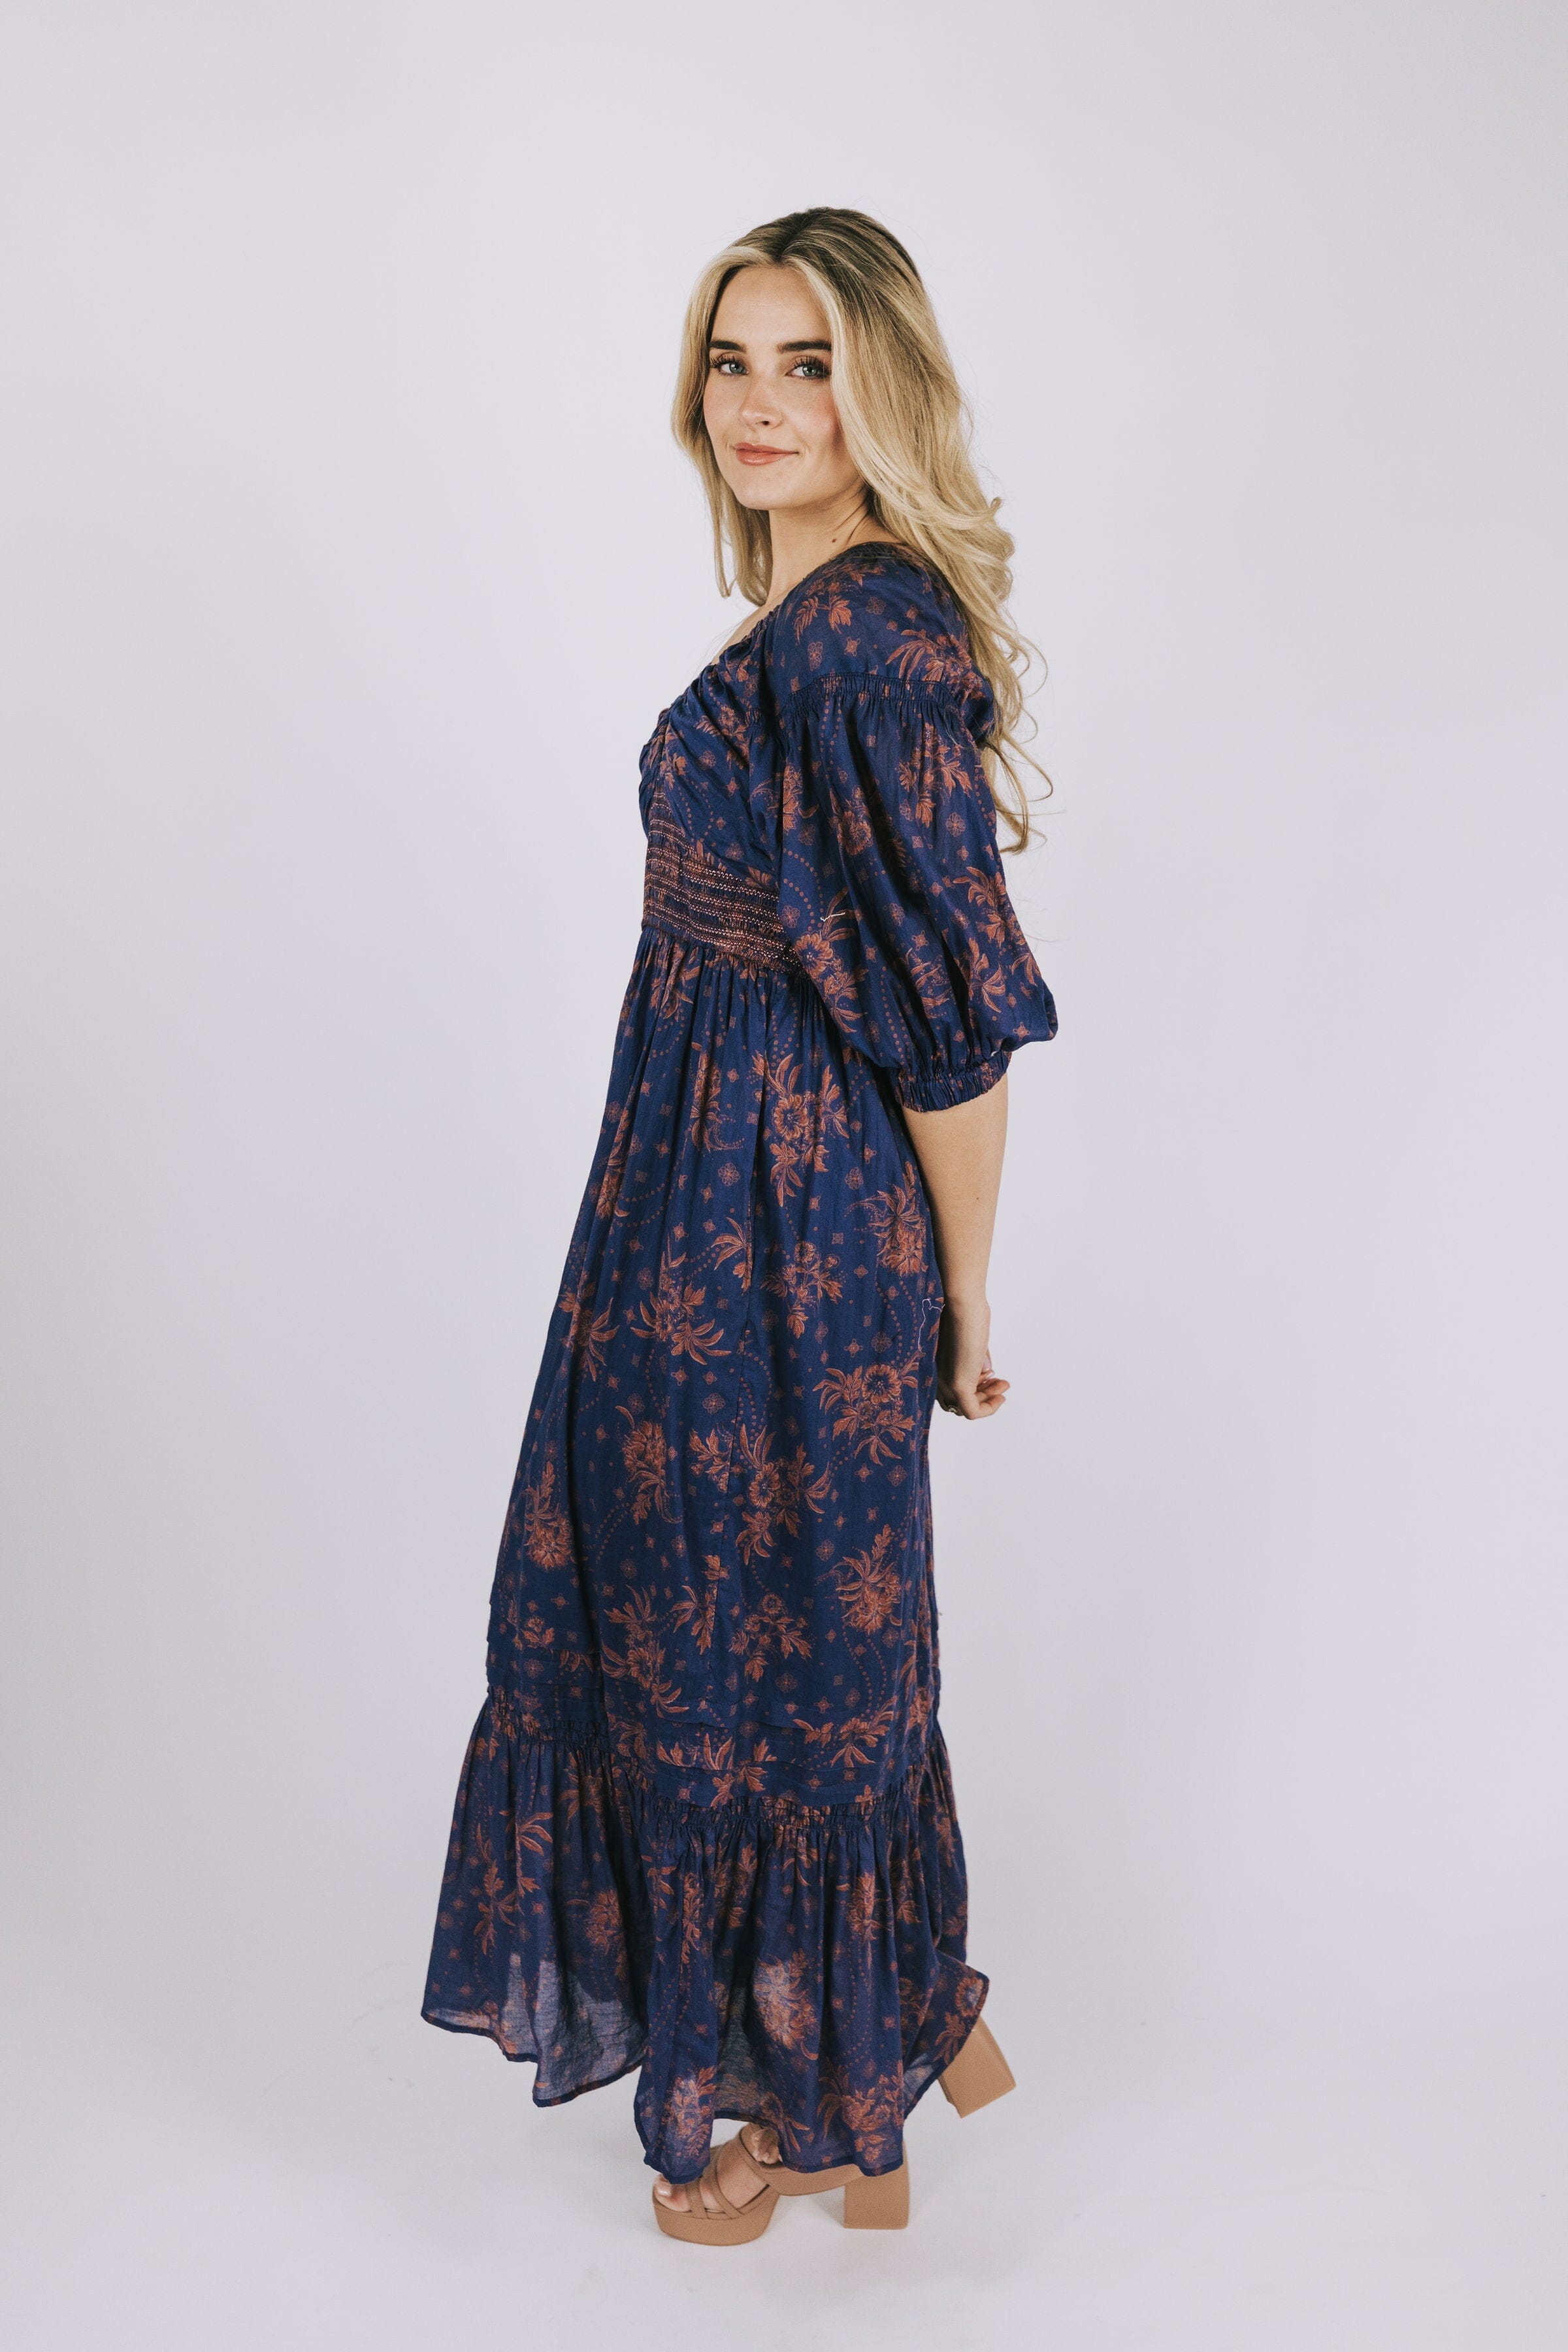 FREE PEOPLE - Golden Hour Maxi Dress - 3 Colors